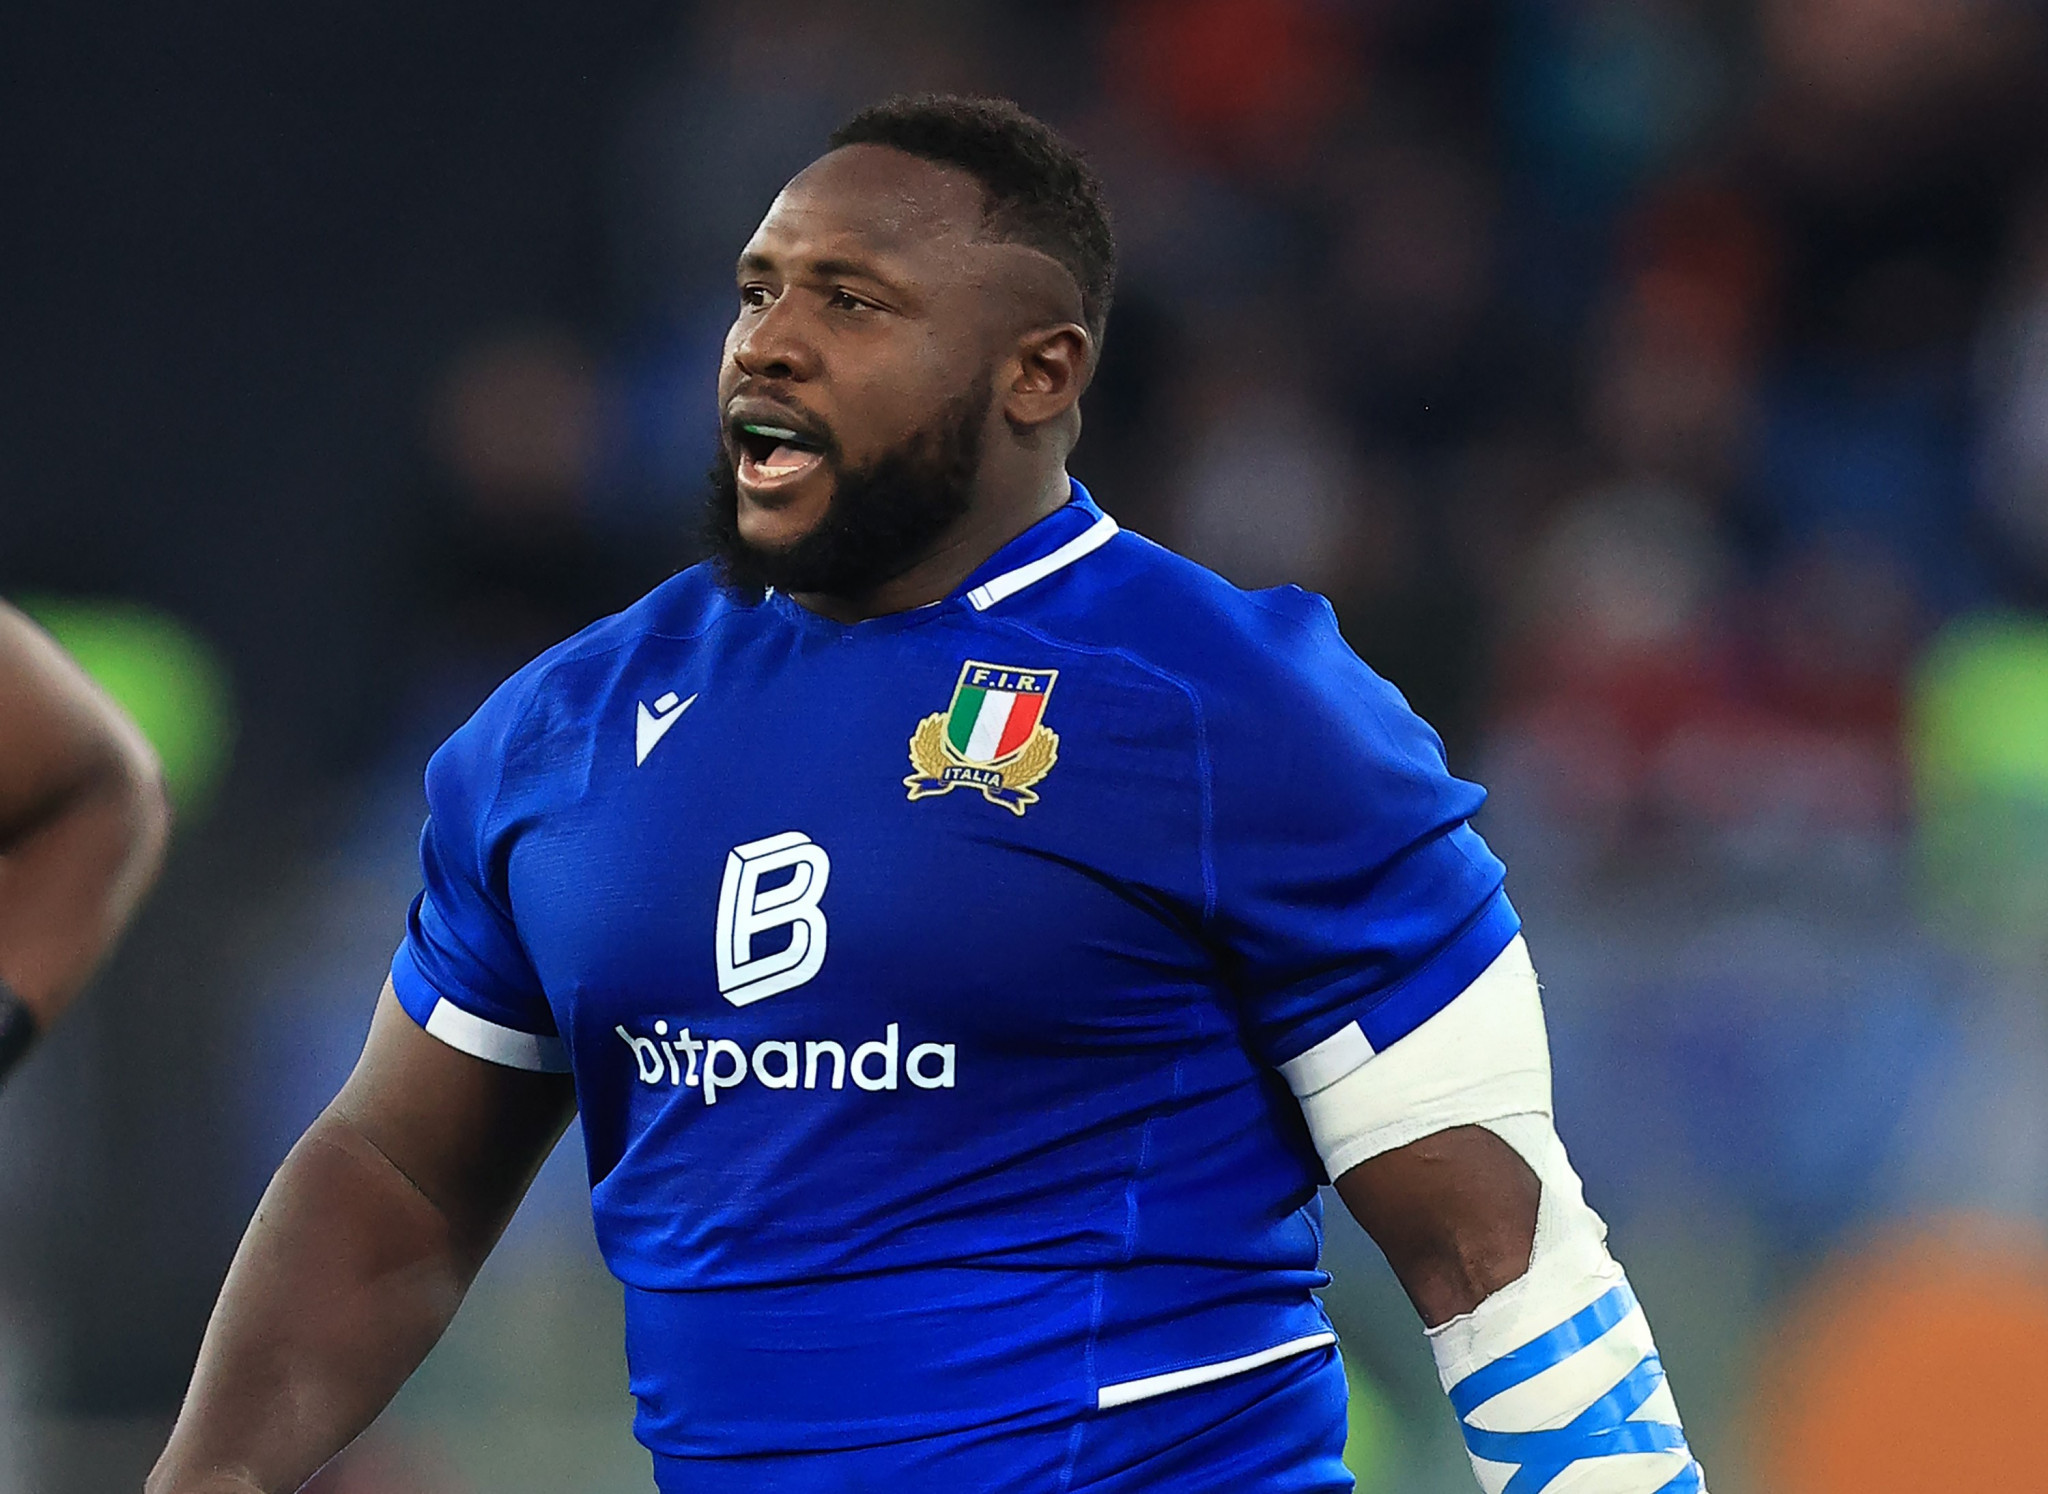 Italy's Traore receives rotten banana Christmas present sparking racism investigation